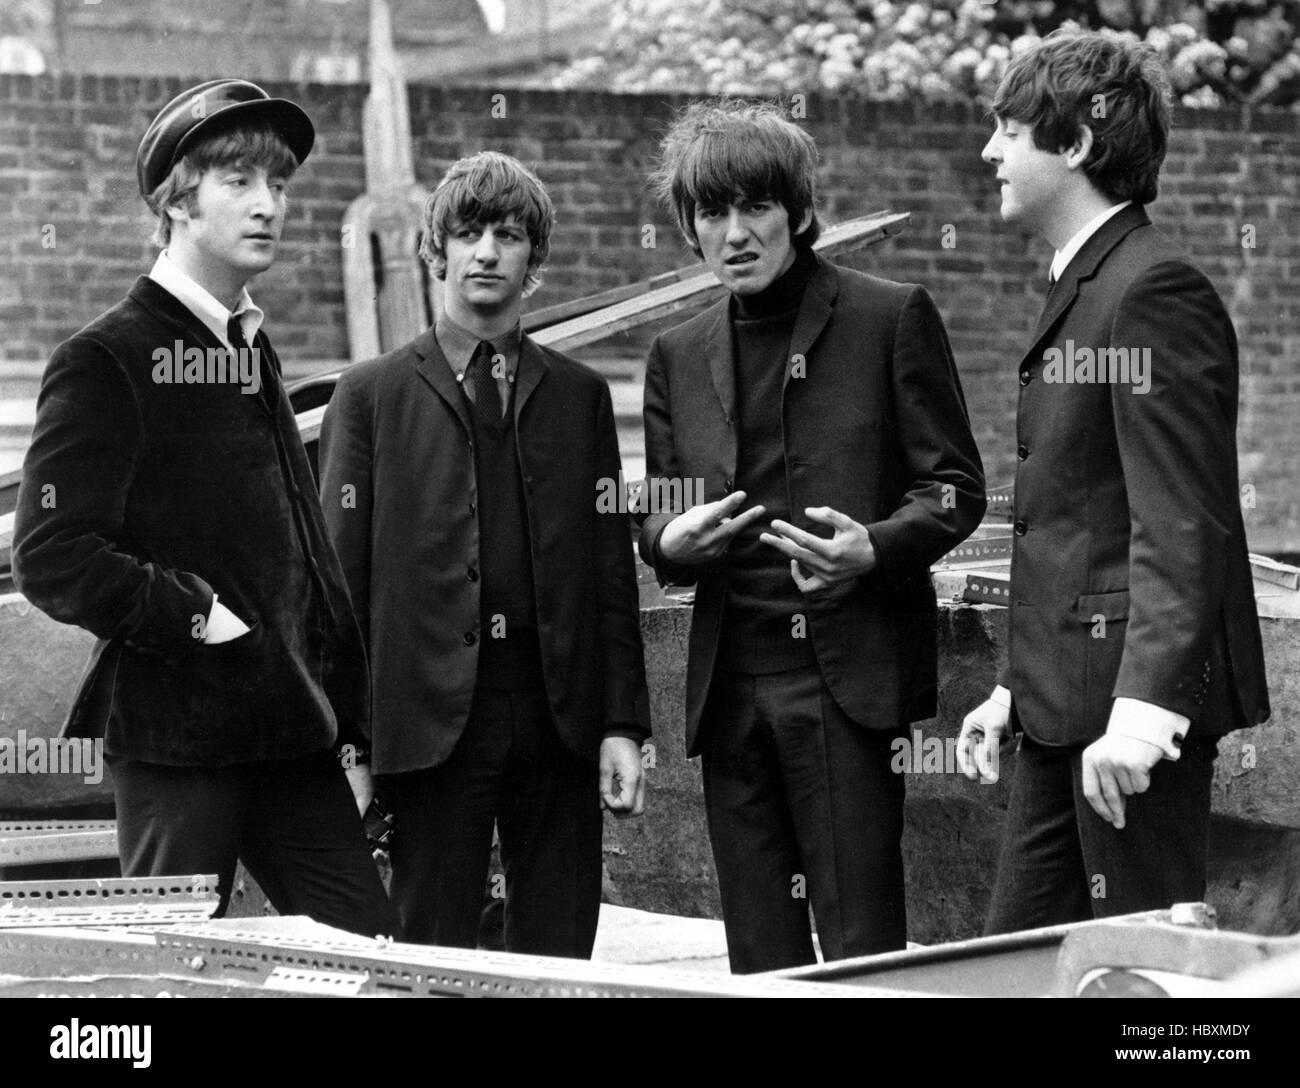 A HARD DAY'S NIGHT, The Beatles, 1964 Stock Photo